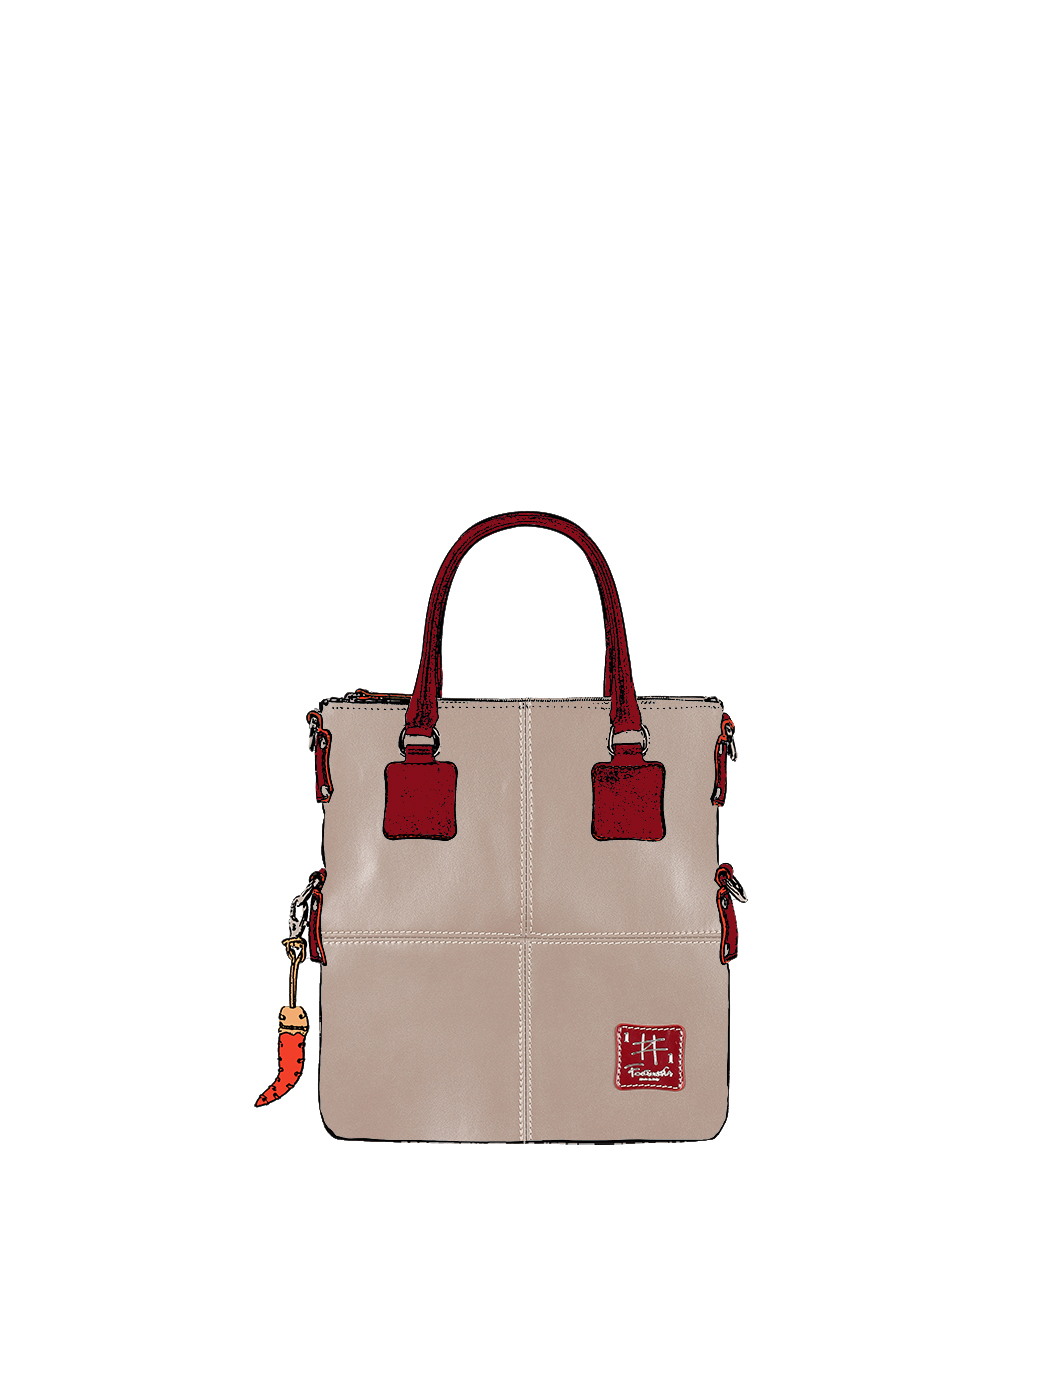 Small Handbag - Leather Tote Bag in Beige